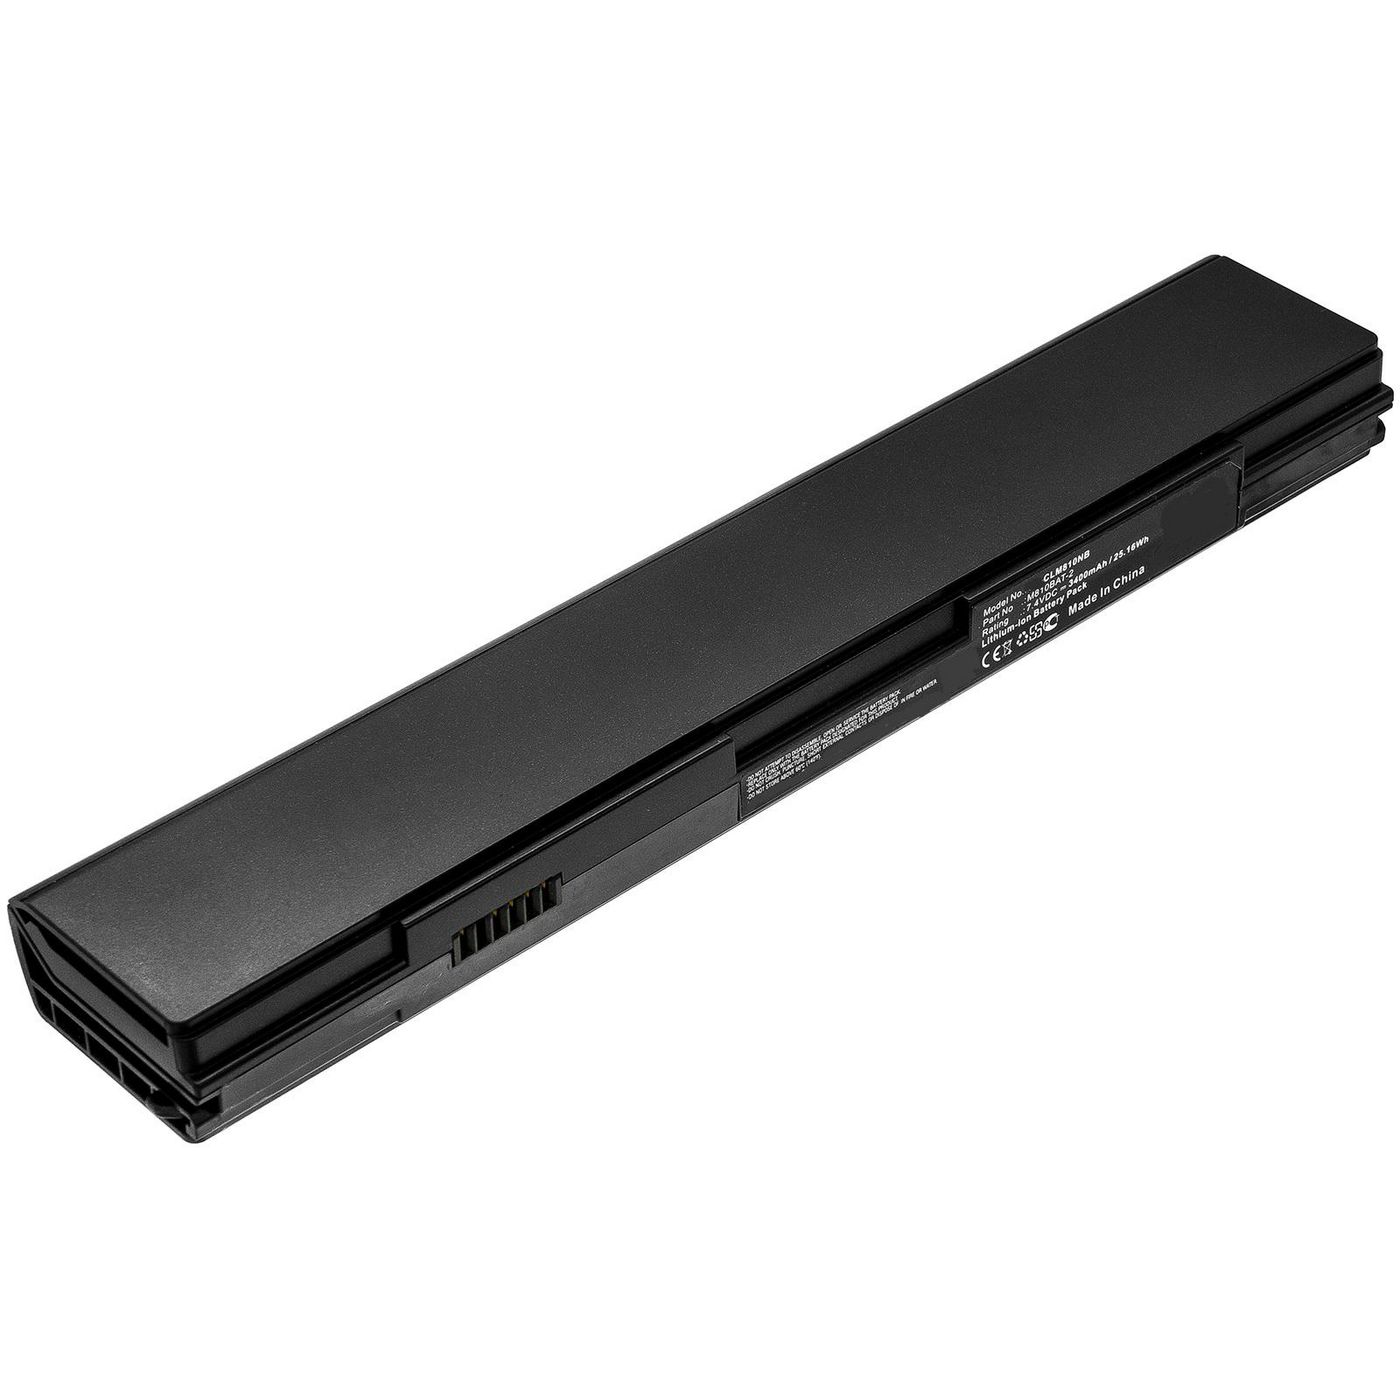 CoreParts MBXCL-BA0023 W125993381 Laptop Battery for Clevo 